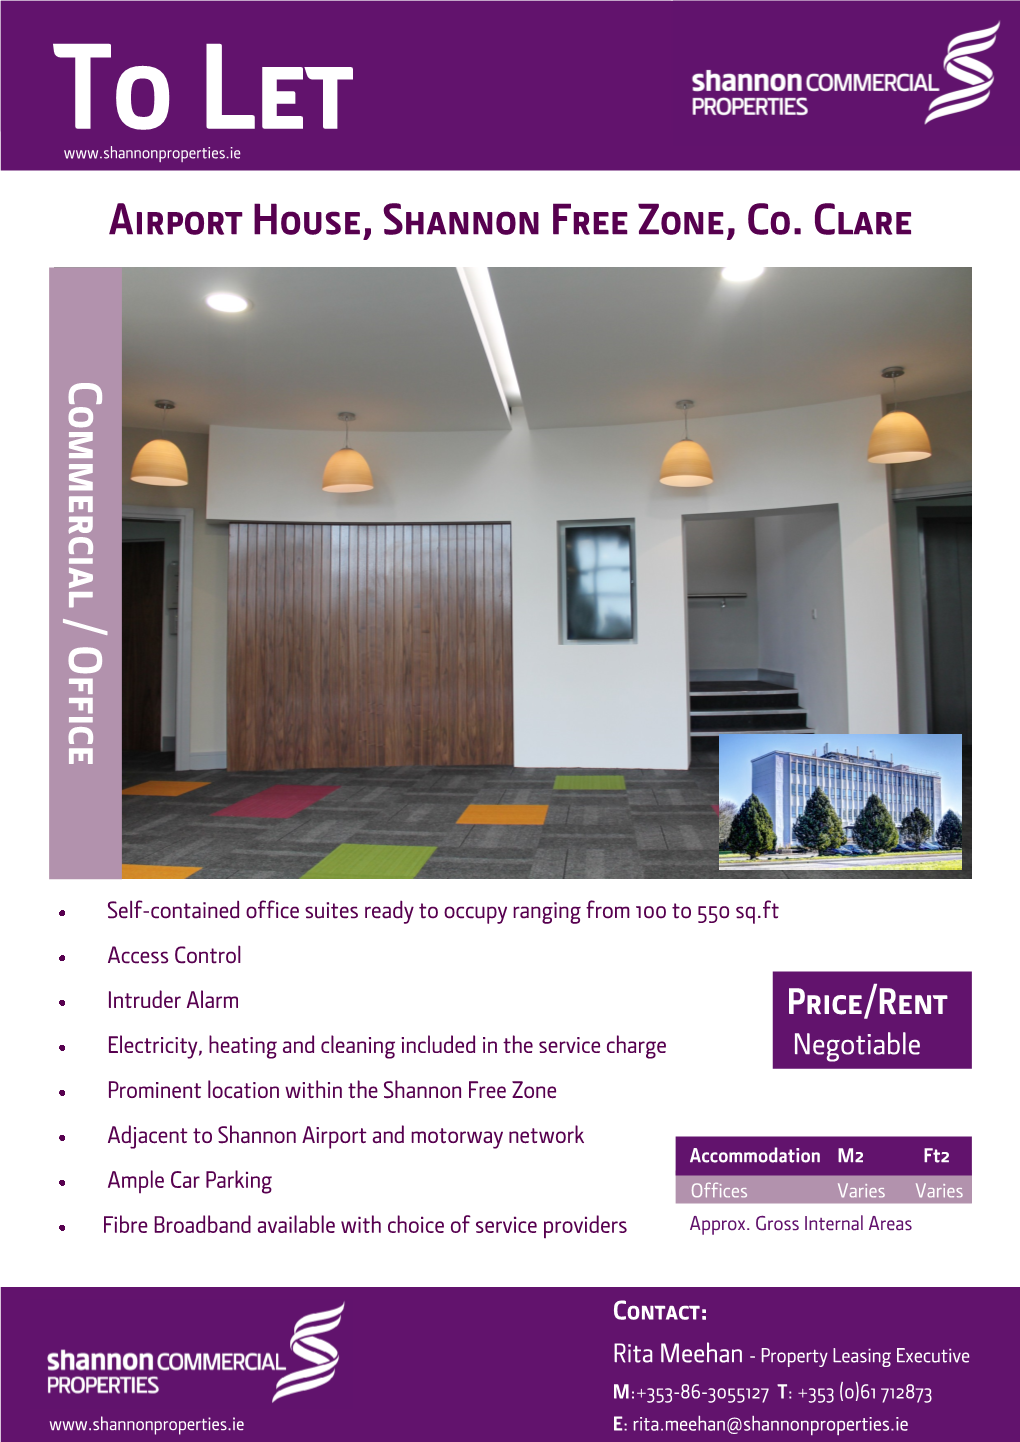 Airport House, Shannon Free Zone, Co. Clare